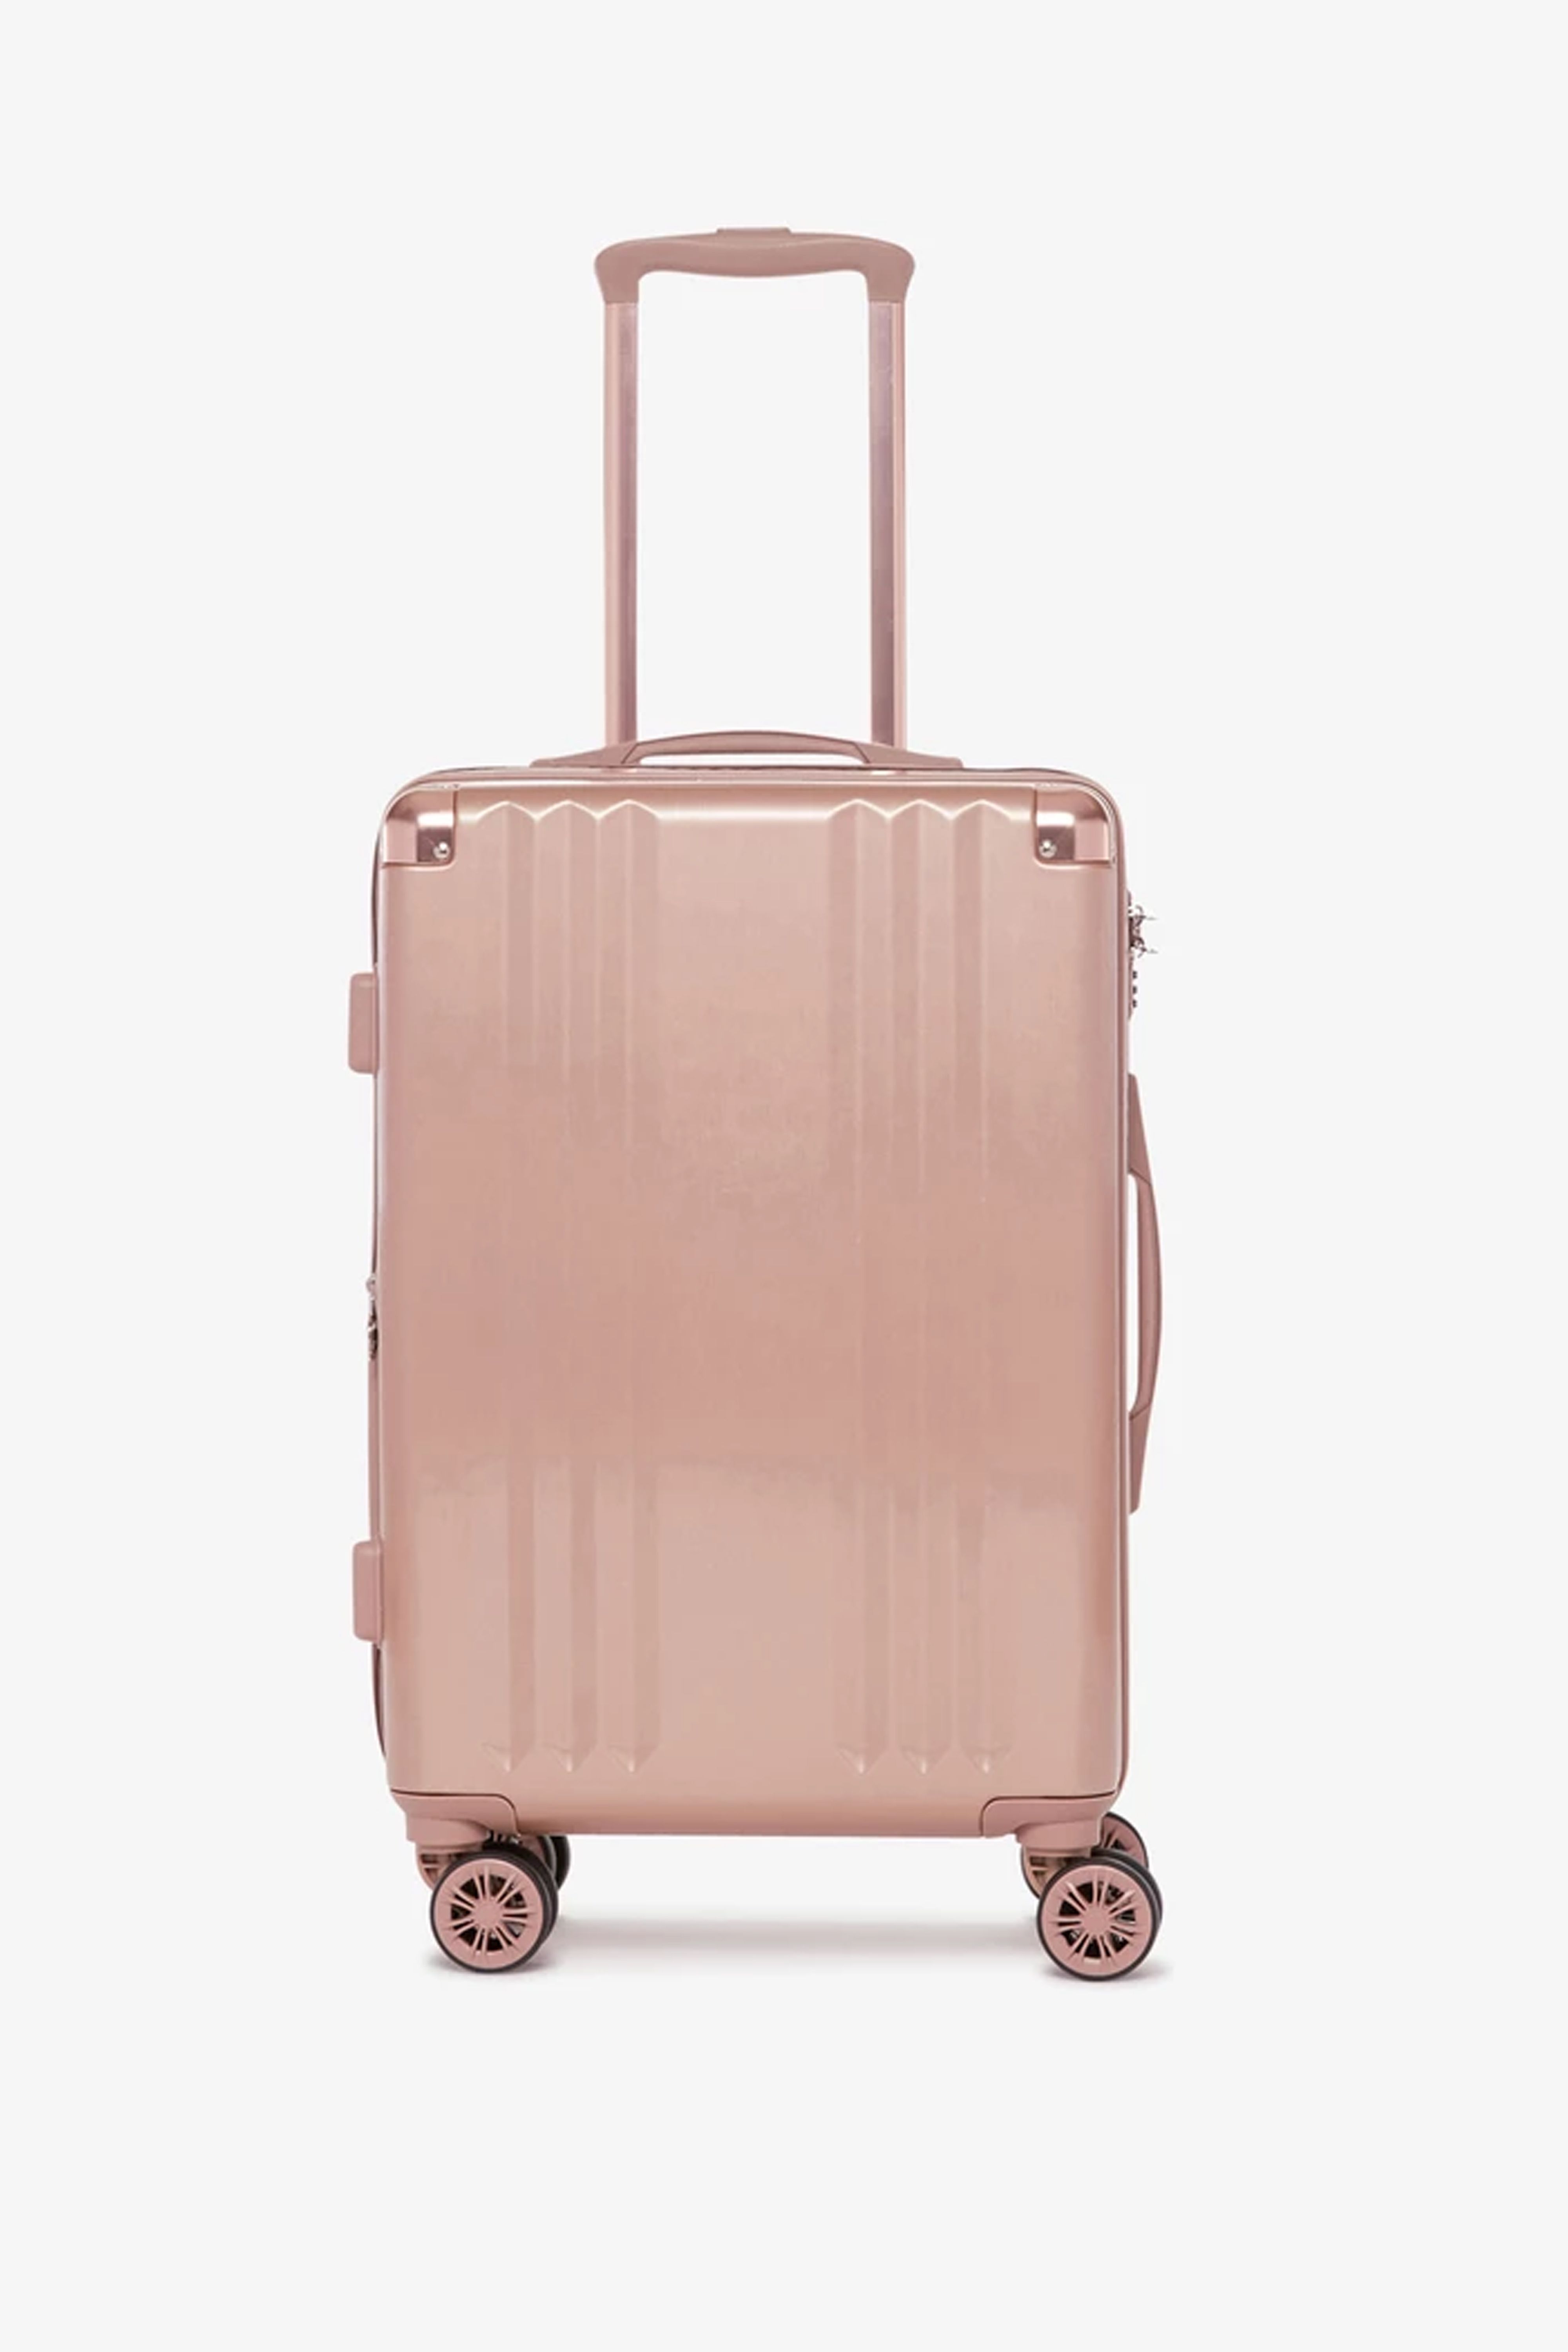 top carry on luggage brands